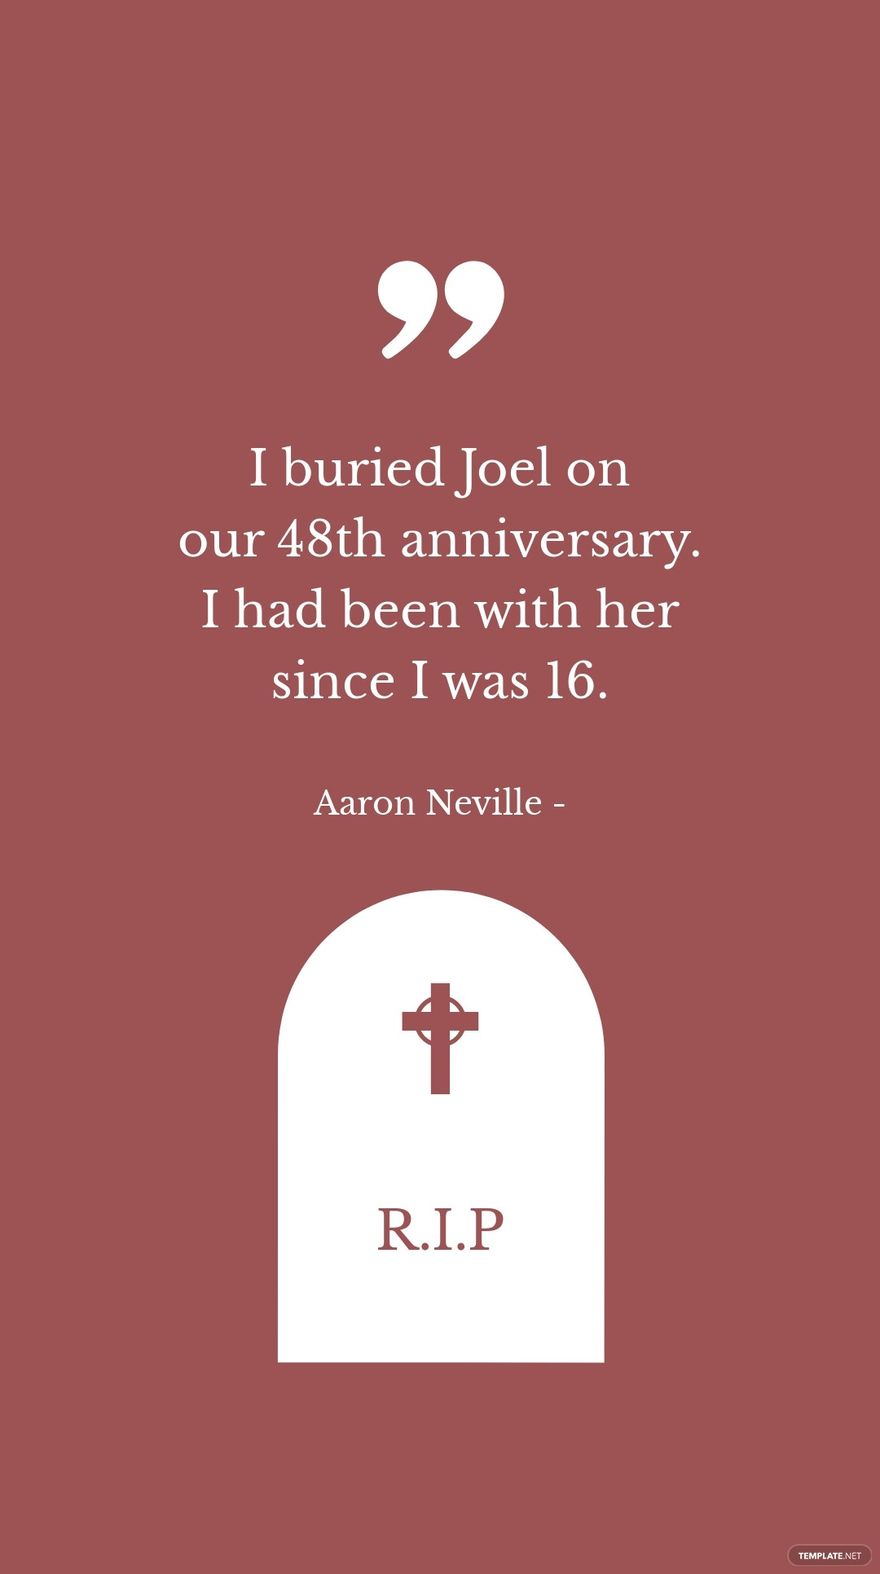 Free Aaron Neville - I buried Joel on our 48th anniversary. I had been with her since I was 16. in JPG